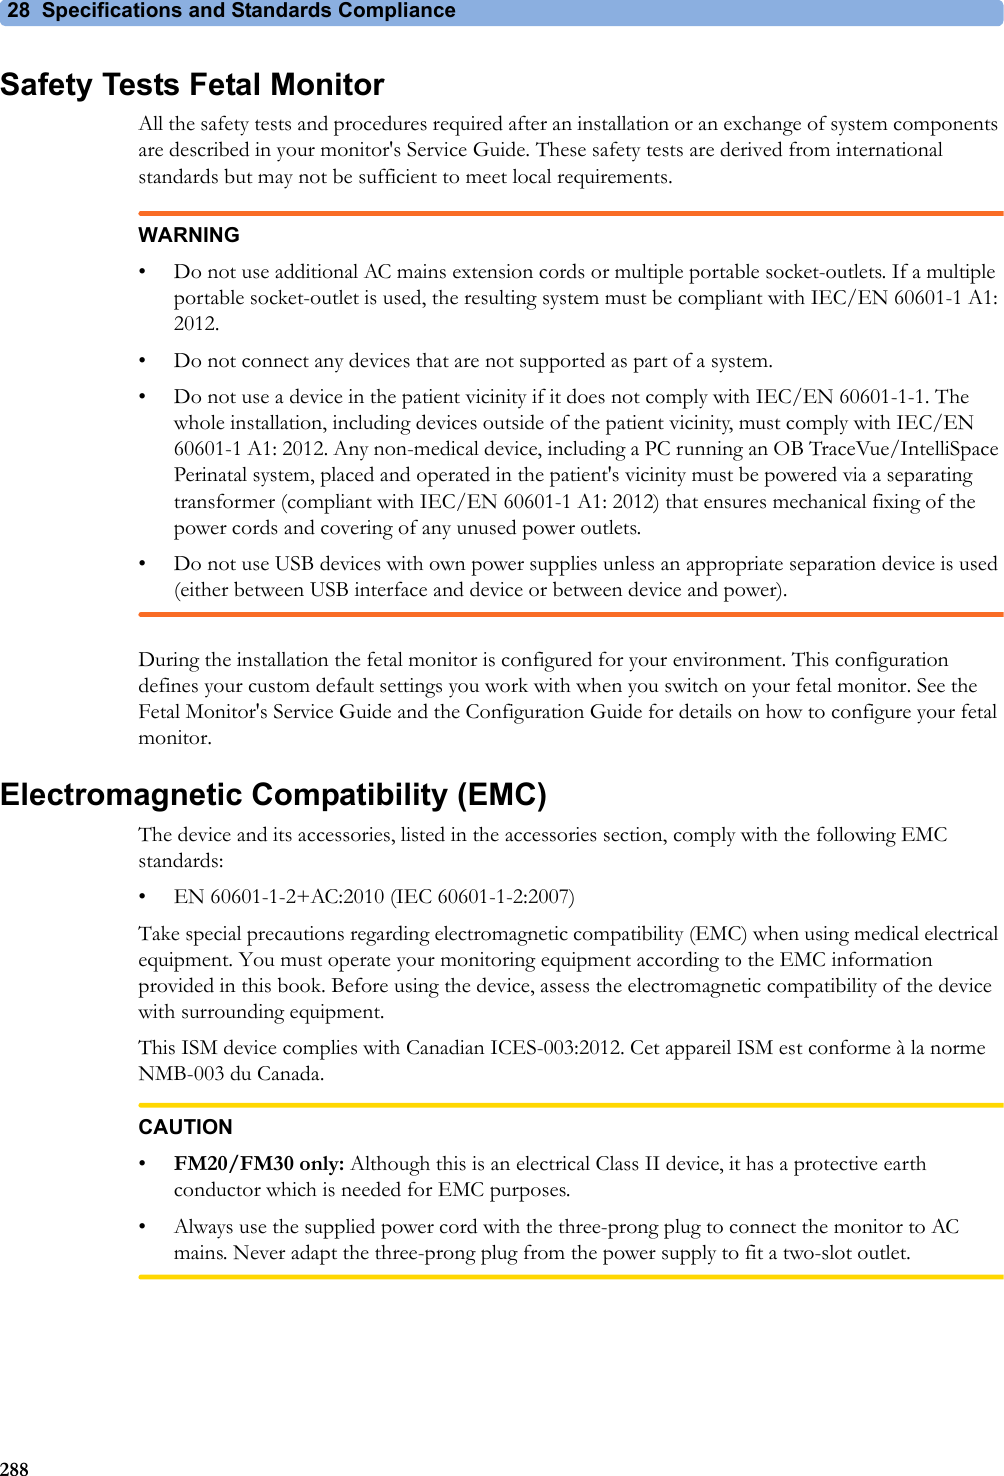 28 Specifications and Standards Compliance288Safety Tests Fetal MonitorAll the safety tests and procedures required after an installation or an exchange of system components are described in your monitor&apos;s Service Guide. These safety tests are derived from international standards but may not be sufficient to meet local requirements.WARNING• Do not use additional AC mains extension cords or multiple portable socket-outlets. If a multiple portable socket-outlet is used, the resulting system must be compliant with IEC/EN 60601-1 A1: 2012.• Do not connect any devices that are not supported as part of a system.• Do not use a device in the patient vicinity if it does not comply with IEC/EN 60601-1-1. The whole installation, including devices outside of the patient vicinity, must comply with IEC/EN 60601-1 A1: 2012. Any non-medical device, including a PC running an OB TraceVue/IntelliSpace Perinatal system, placed and operated in the patient&apos;s vicinity must be powered via a separating transformer (compliant with IEC/EN 60601-1 A1: 2012) that ensures mechanical fixing of the power cords and covering of any unused power outlets.• Do not use USB devices with own power supplies unless an appropriate separation device is used (either between USB interface and device or between device and power).During the installation the fetal monitor is configured for your environment. This configuration defines your custom default settings you work with when you switch on your fetal monitor. See the Fetal Monitor&apos;s Service Guide and the Configuration Guide for details on how to configure your fetal monitor.Electromagnetic Compatibility (EMC)The device and its accessories, listed in the accessories section, comply with the following EMC standards:• EN 60601-1-2+AC:2010 (IEC 60601-1-2:2007)Take special precautions regarding electromagnetic compatibility (EMC) when using medical electrical equipment. You must operate your monitoring equipment according to the EMC information provided in this book. Before using the device, assess the electromagnetic compatibility of the device with surrounding equipment.This ISM device complies with Canadian ICES-003:2012. Cet appareil ISM est conforme à la norme NMB-003 du Canada.CAUTION•FM20/FM30 only: Although this is an electrical Class II device, it has a protective earth conductor which is needed for EMC purposes.• Always use the supplied power cord with the three-prong plug to connect the monitor to AC mains. Never adapt the three-prong plug from the power supply to fit a two-slot outlet.